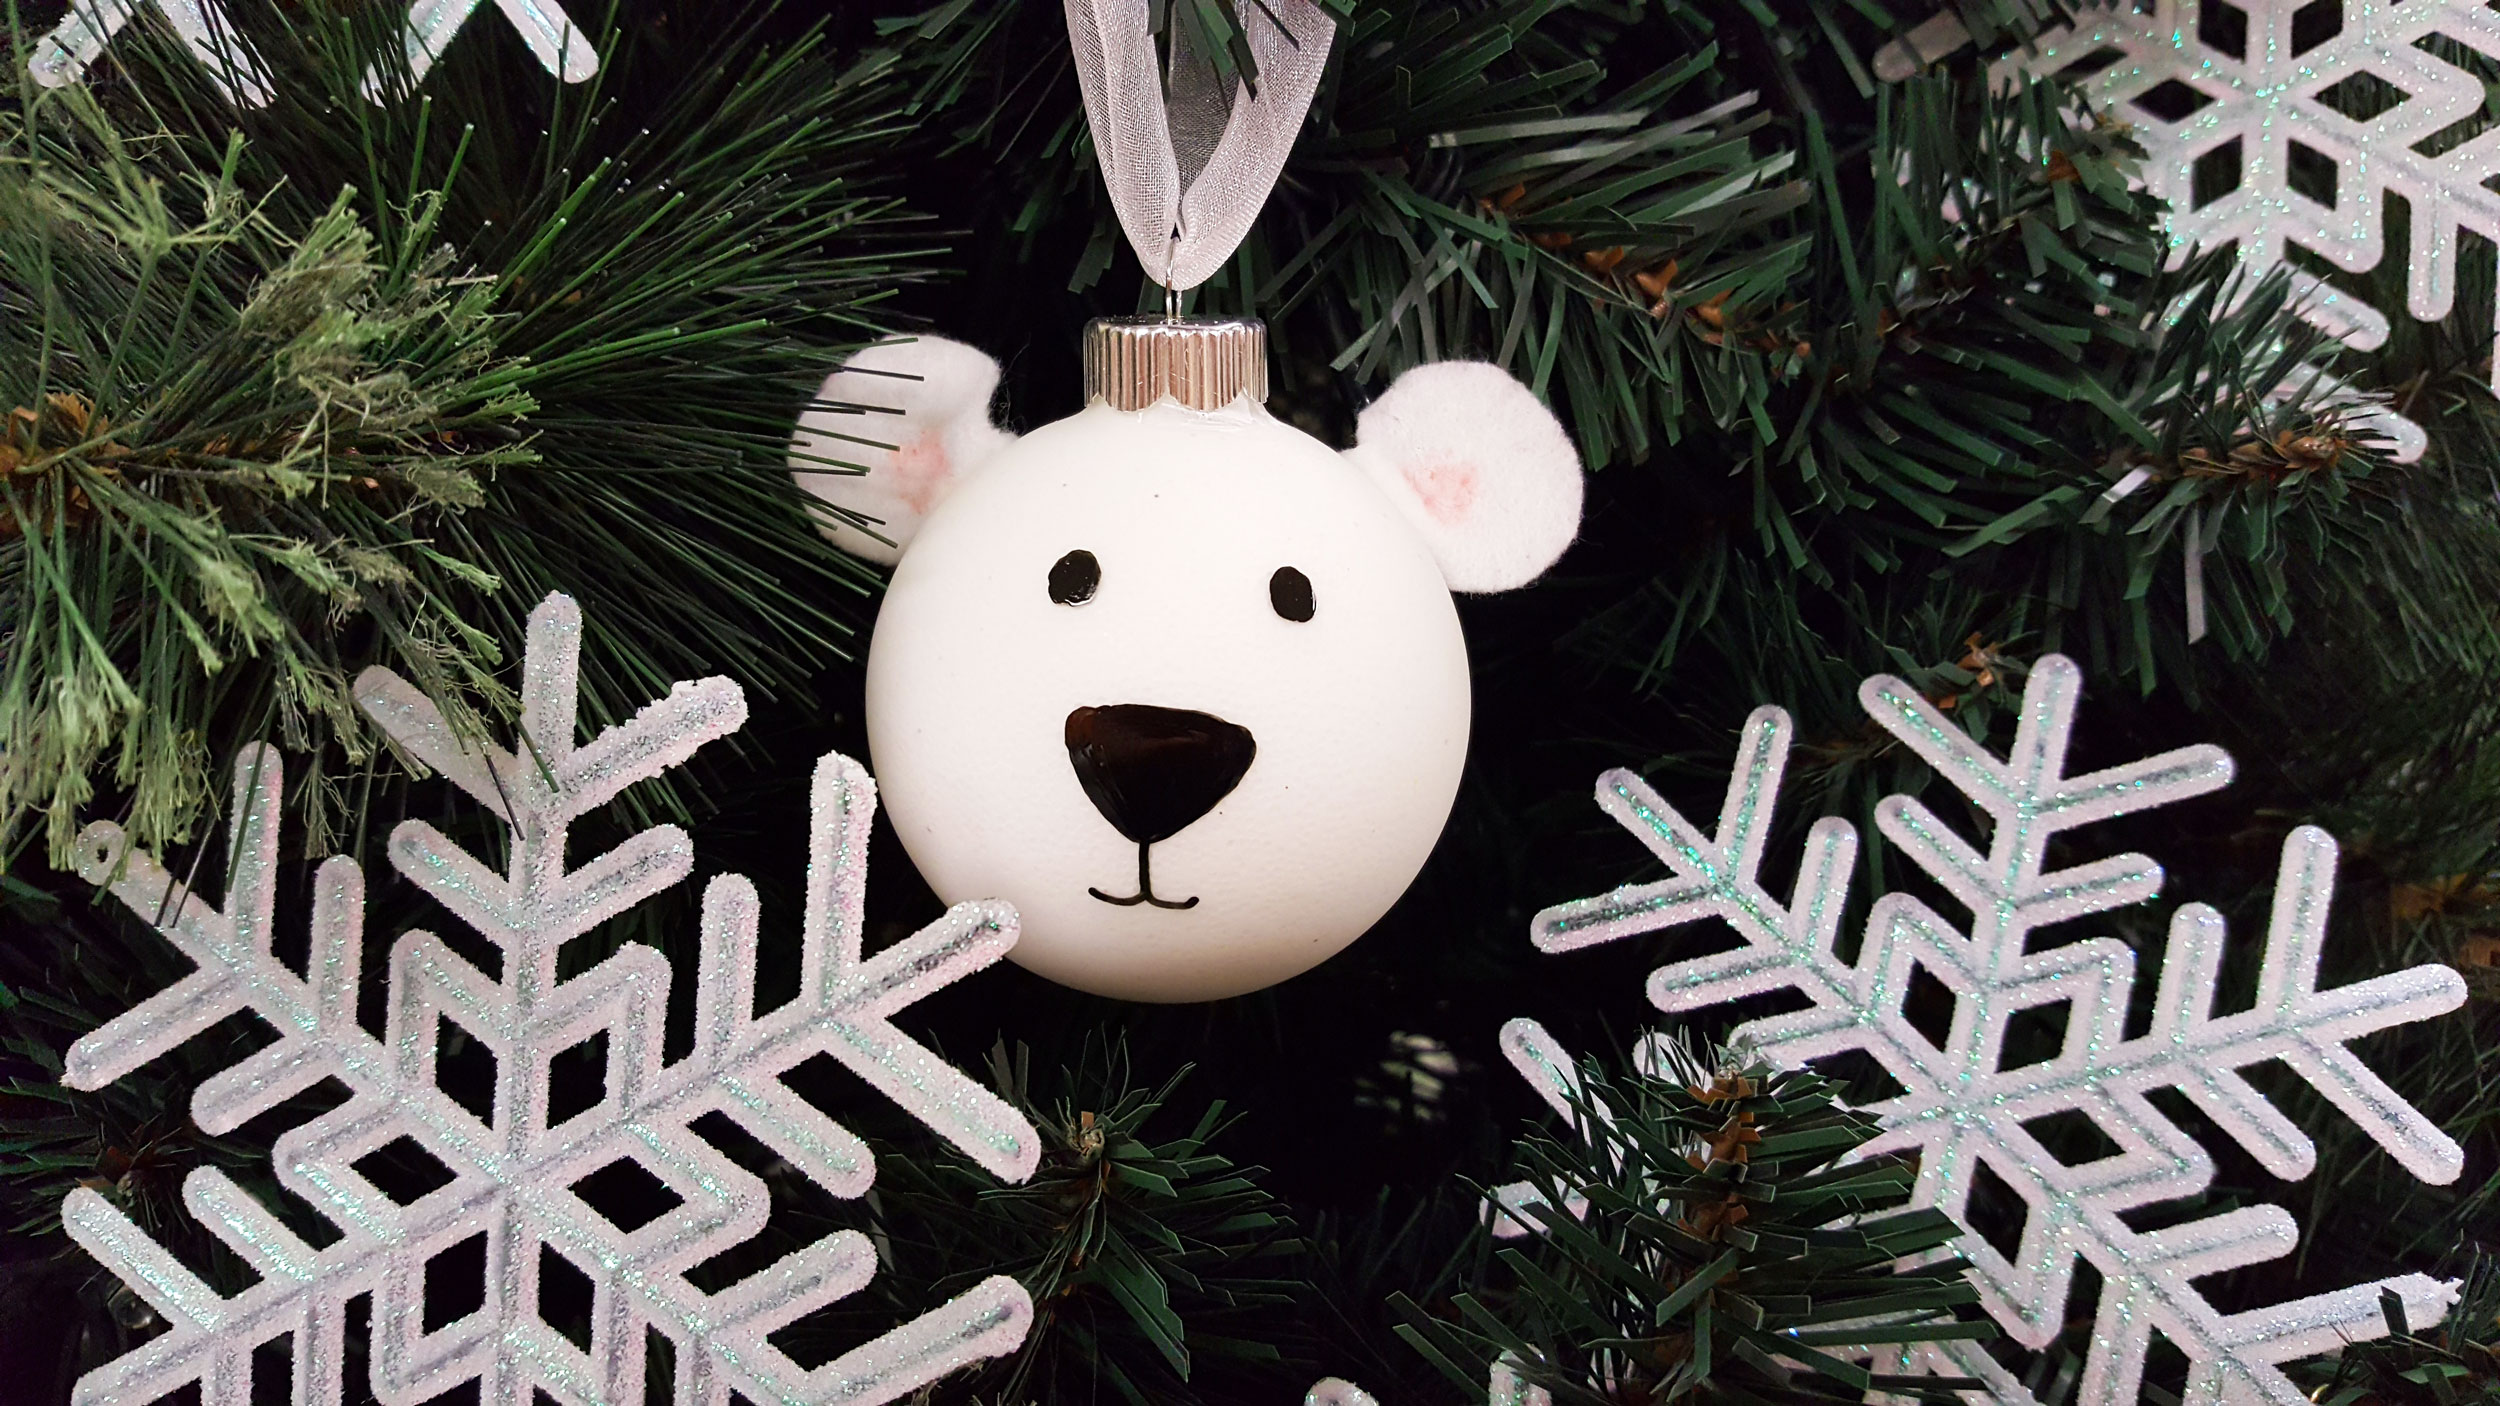 a white DIY polar bear ornament made from a bauble ornament and hiding in a tree behind giant snowflakes. | OrnamentShop.com